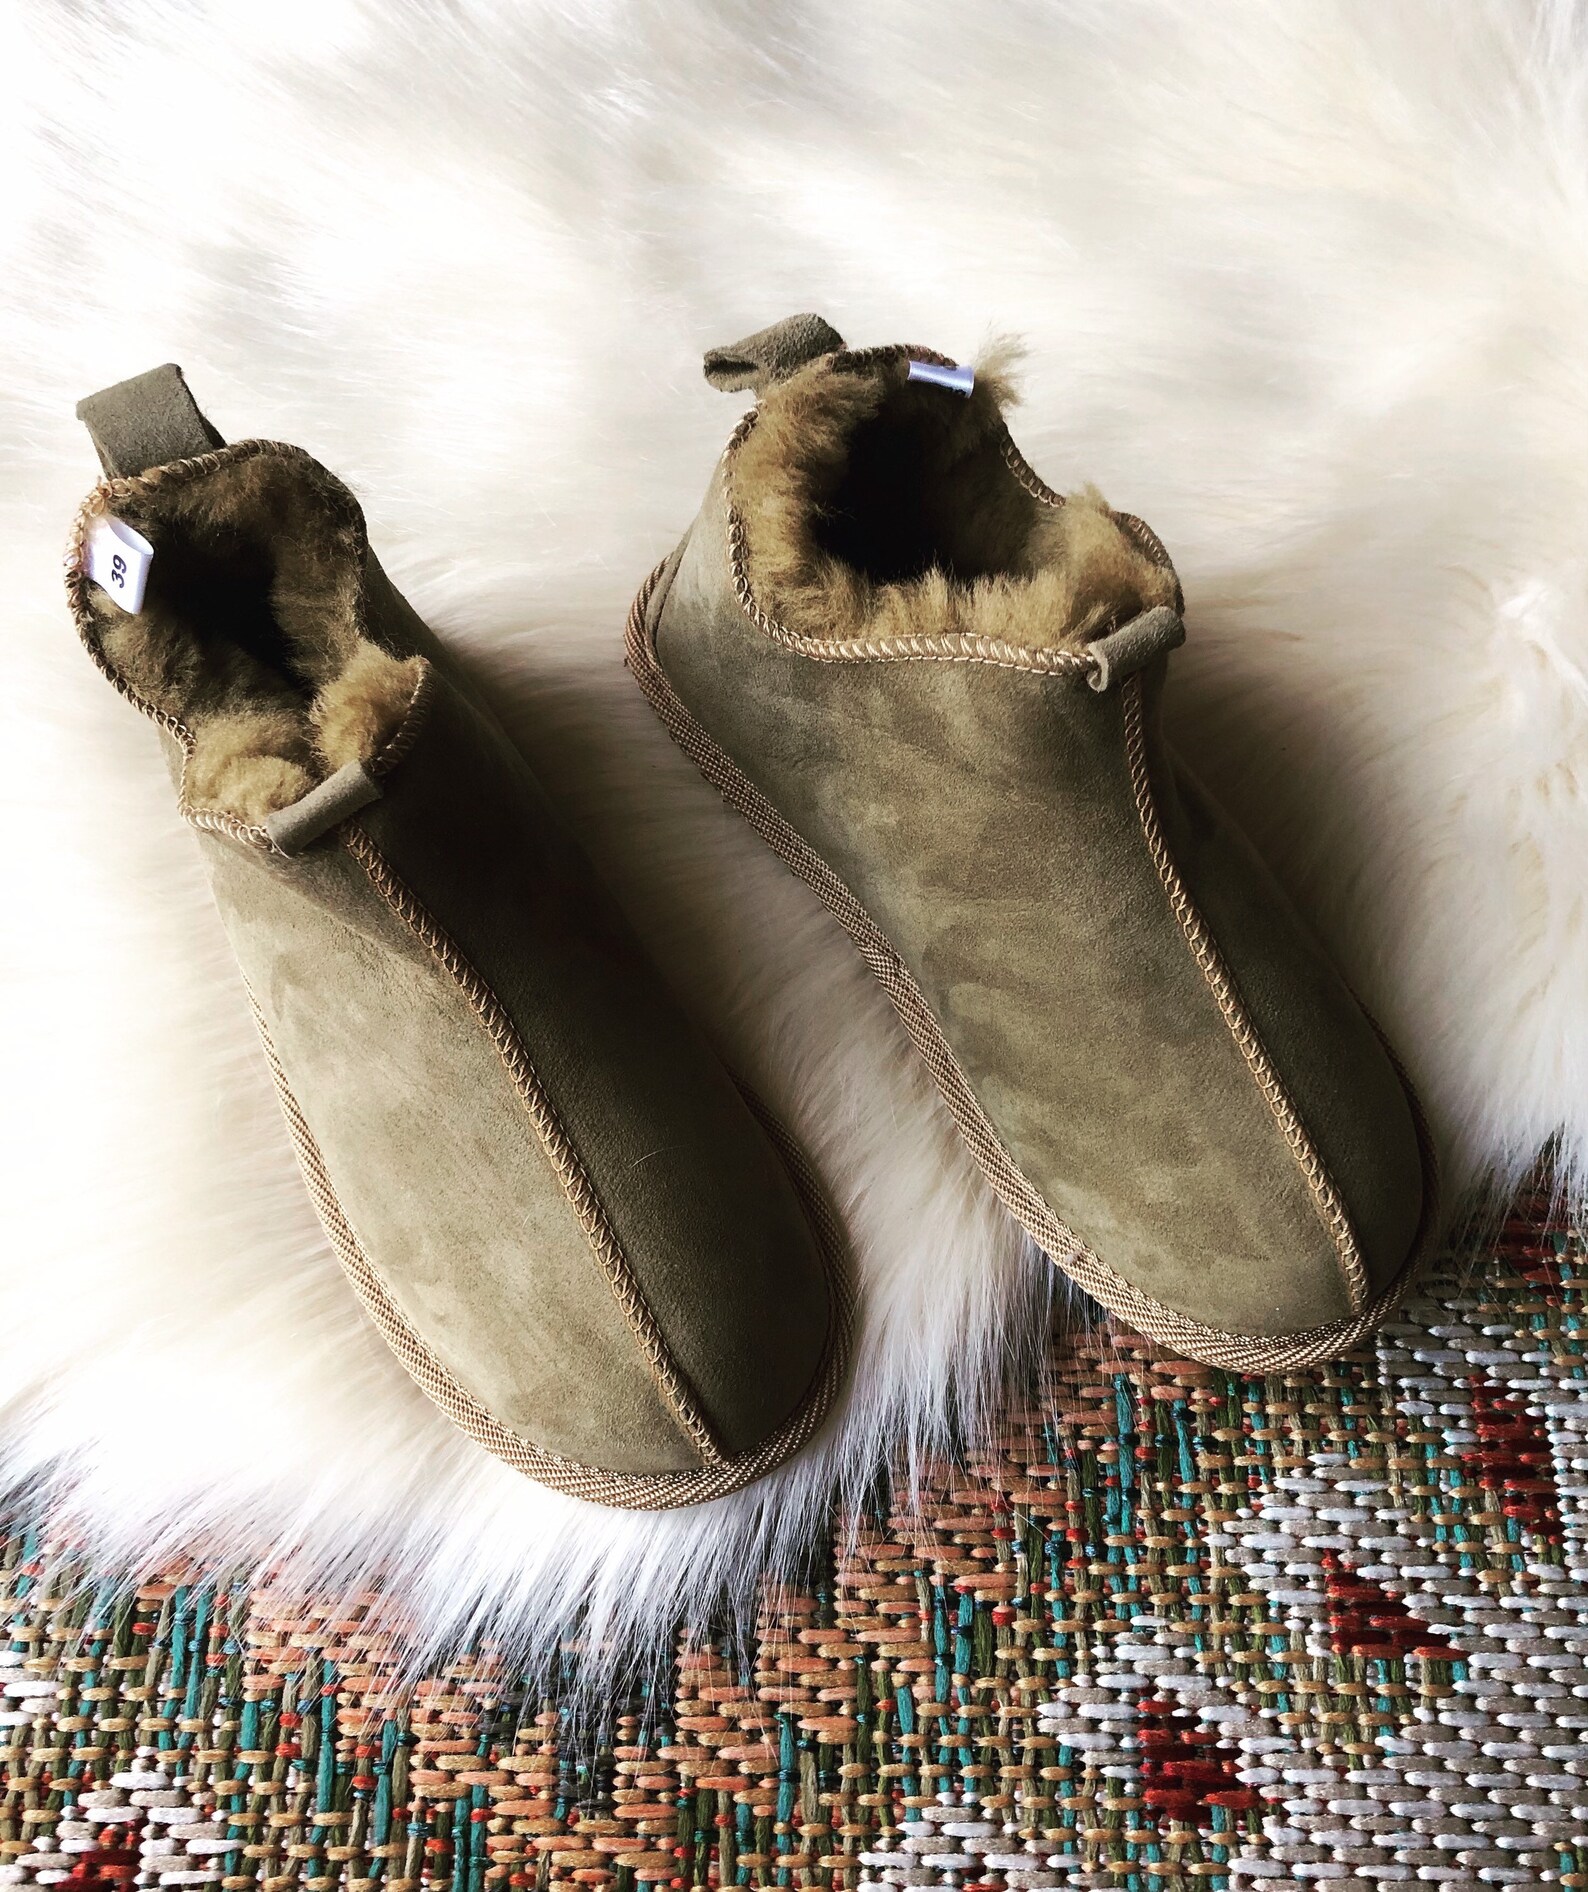 Olive Green Sheepskin Boots / Real Leather Slippers - Etsy UK